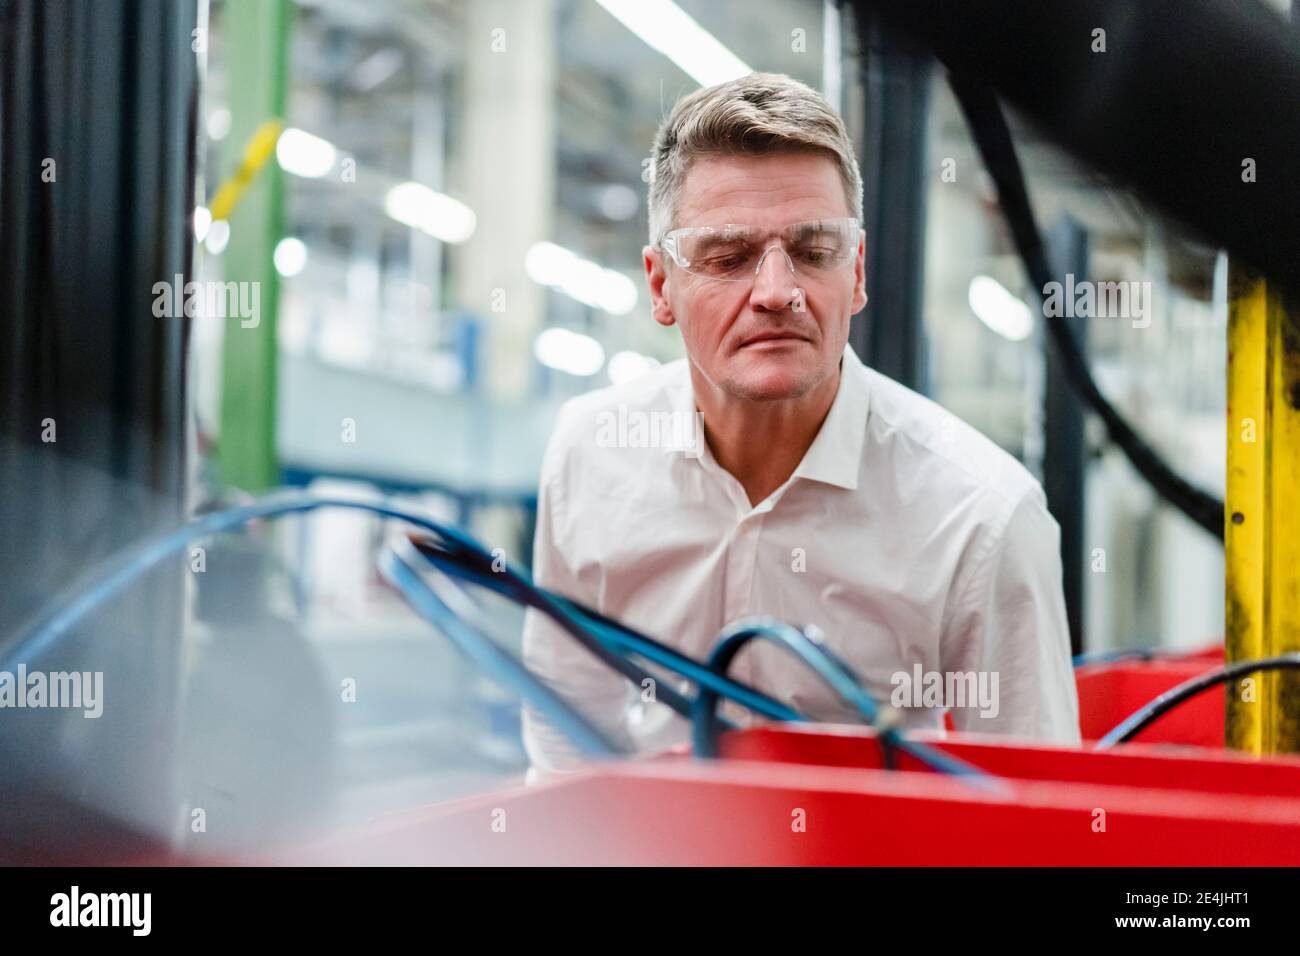 Mature manager wearing protective eyewear examining machinery in industry Stock Photo